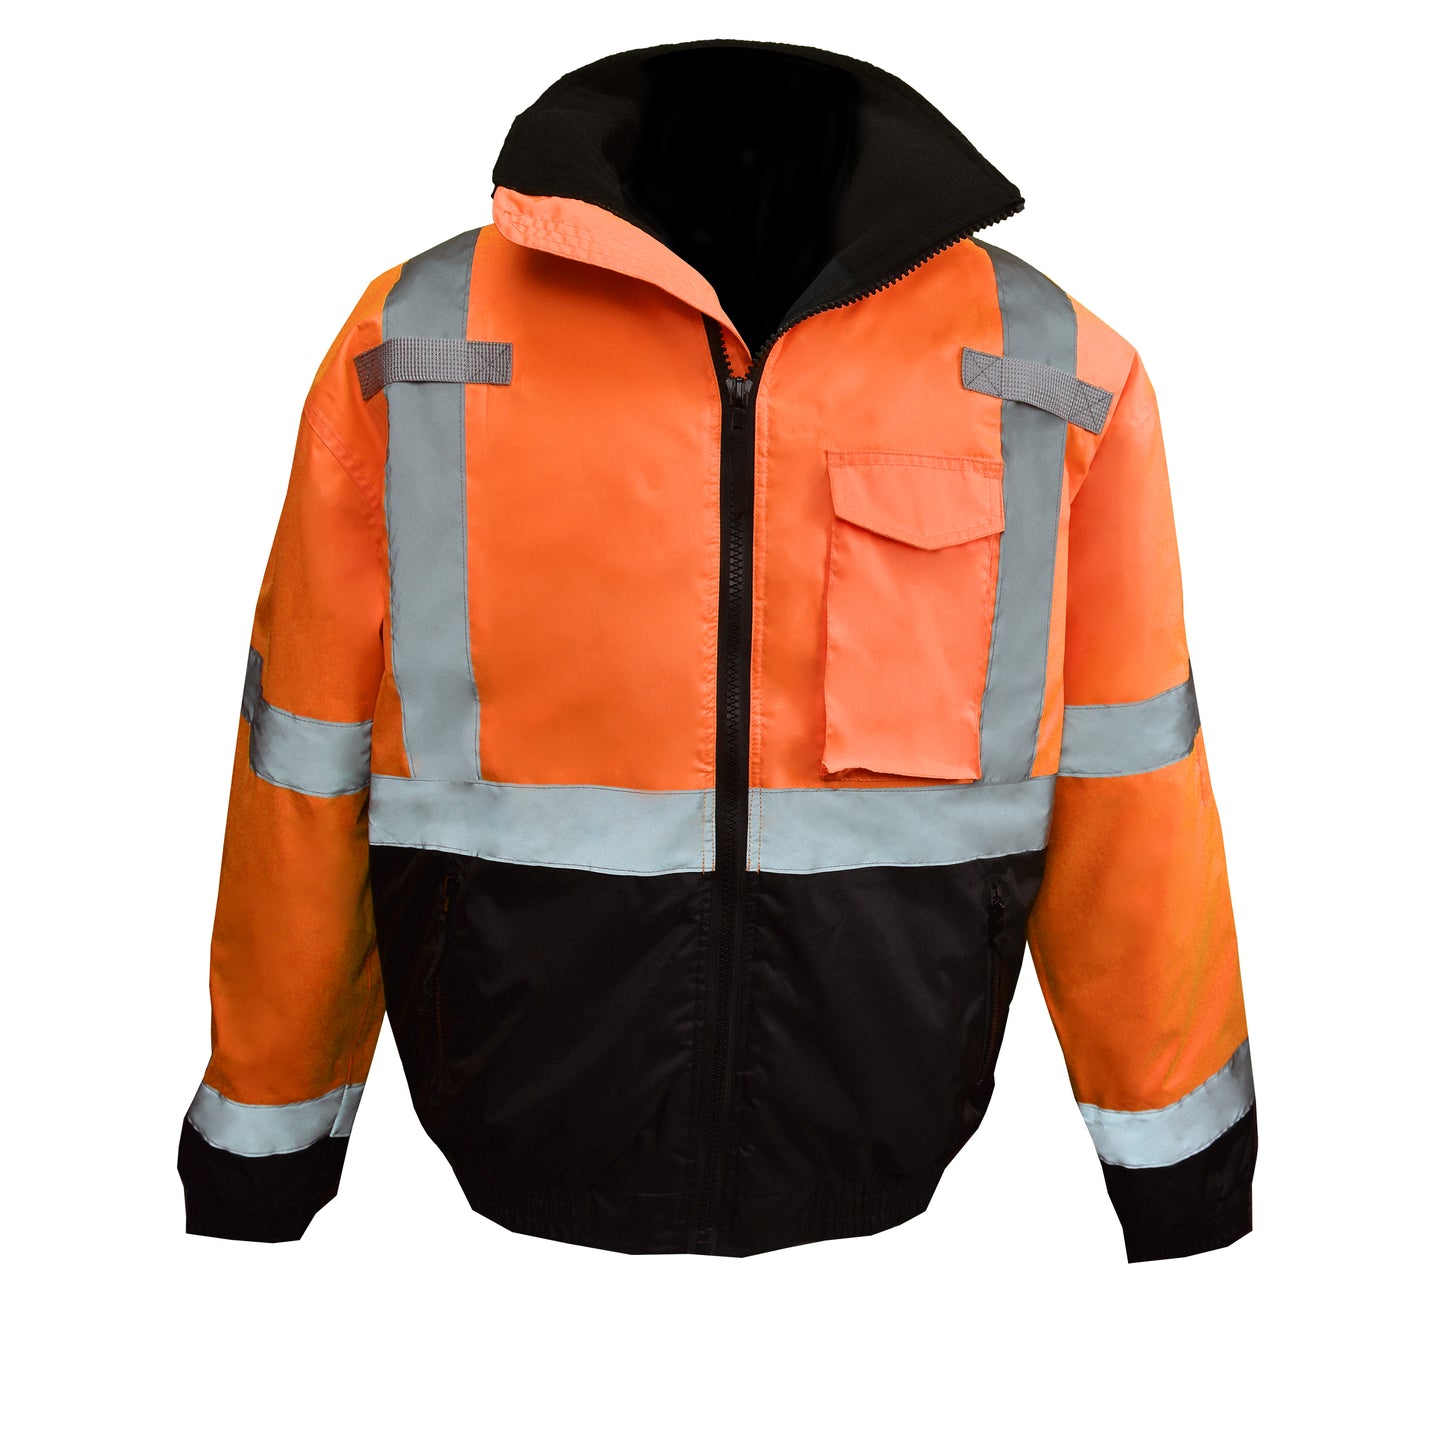 Radians SJ11QB Class3 High Visibility Weatherproof Bomber Jacket with Quilted Built-in Liner